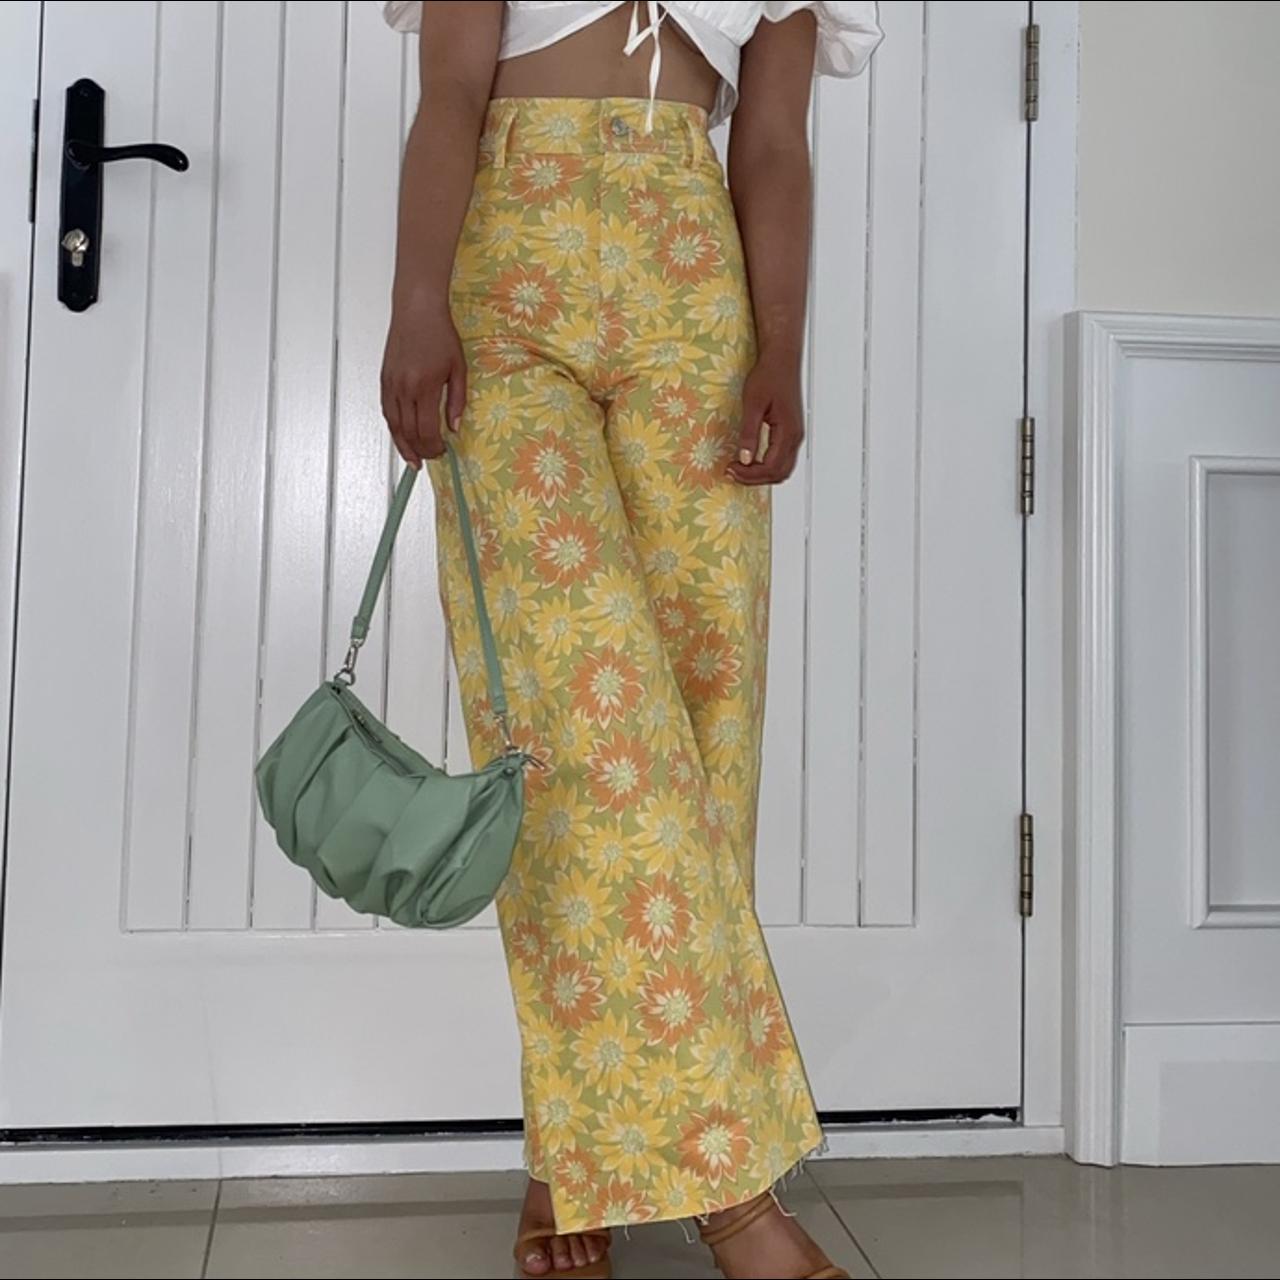 Fairytale Floral Palazzo Pants